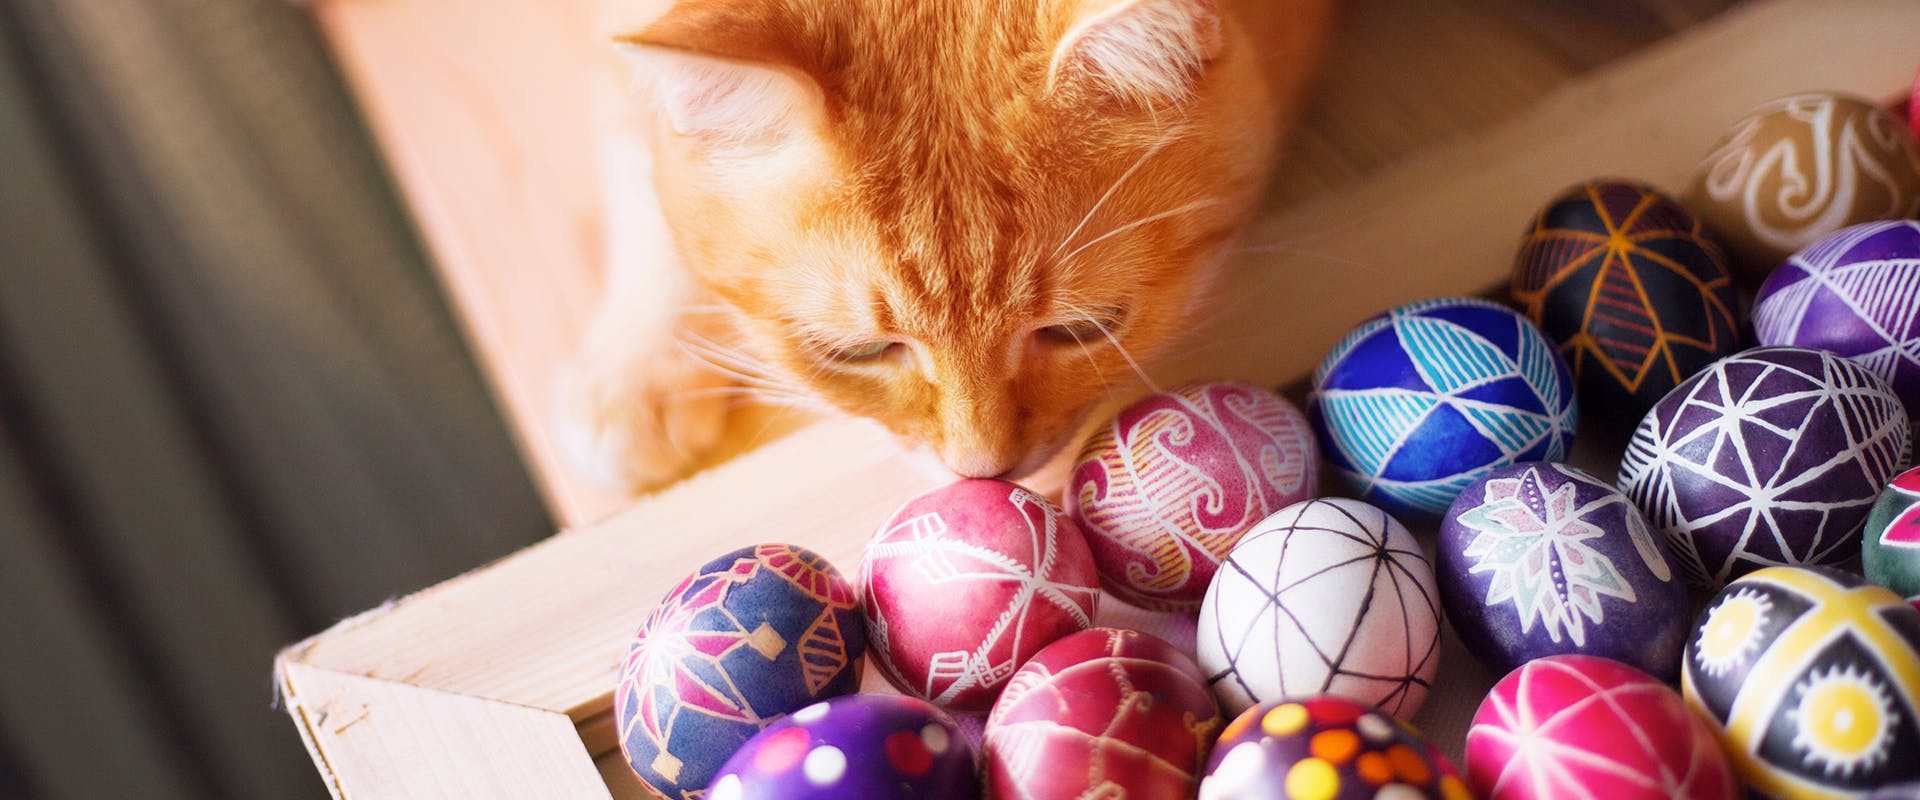 A ginger cat sniffing at a box of brightly painted Easter egg decorations 